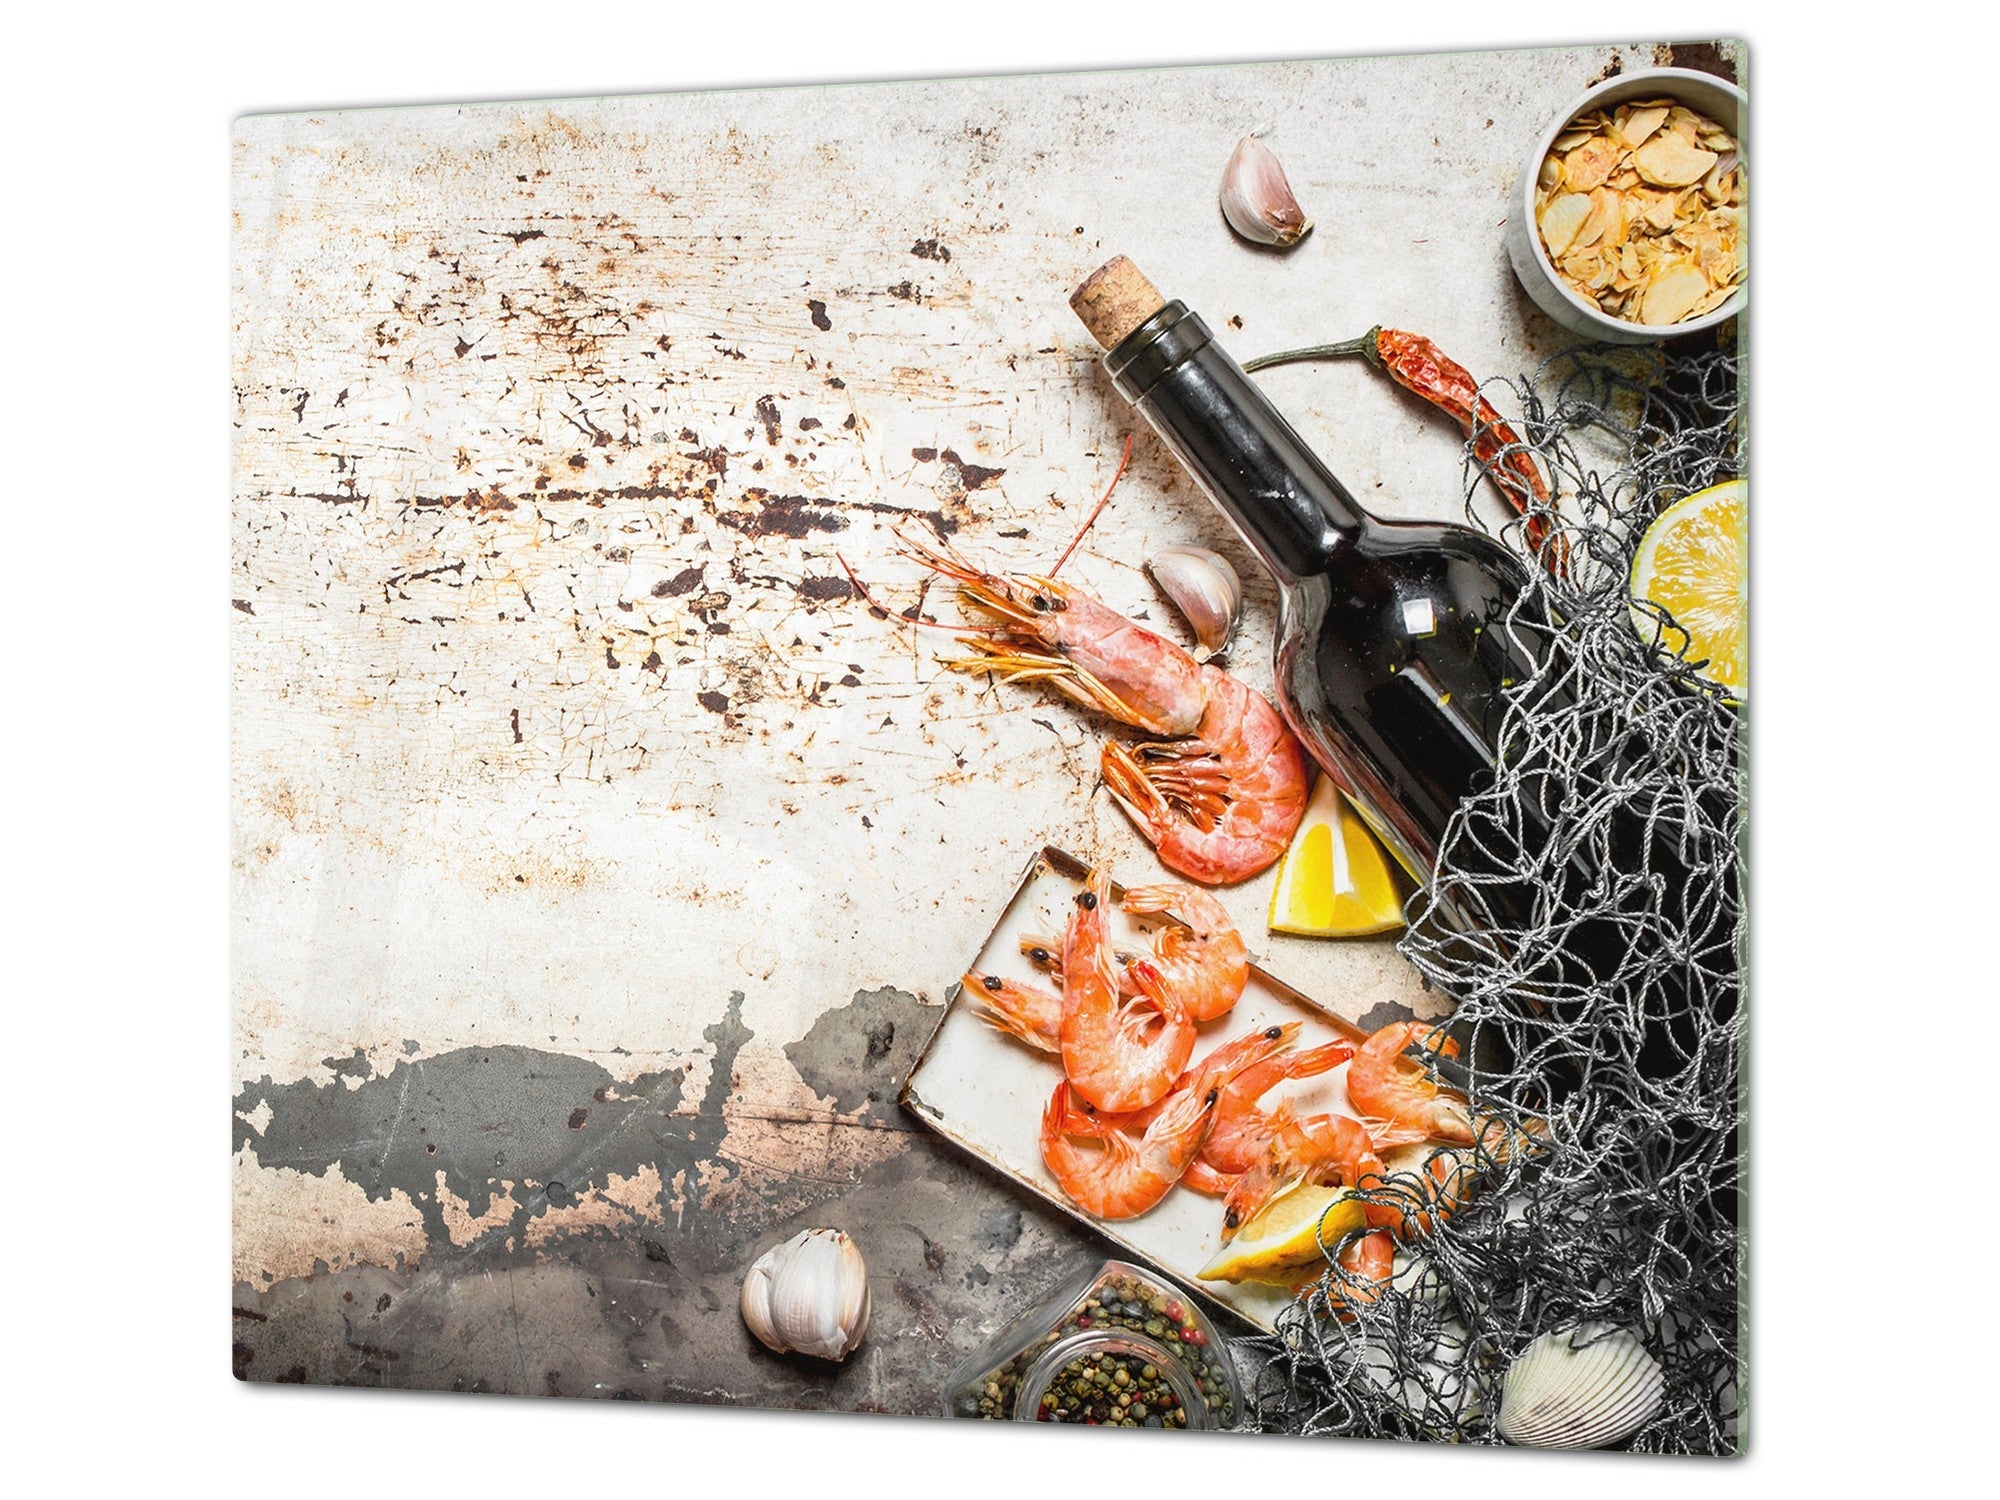 Charcuterie Board - Seafood Boil | Decorative Serving Tray and Platter